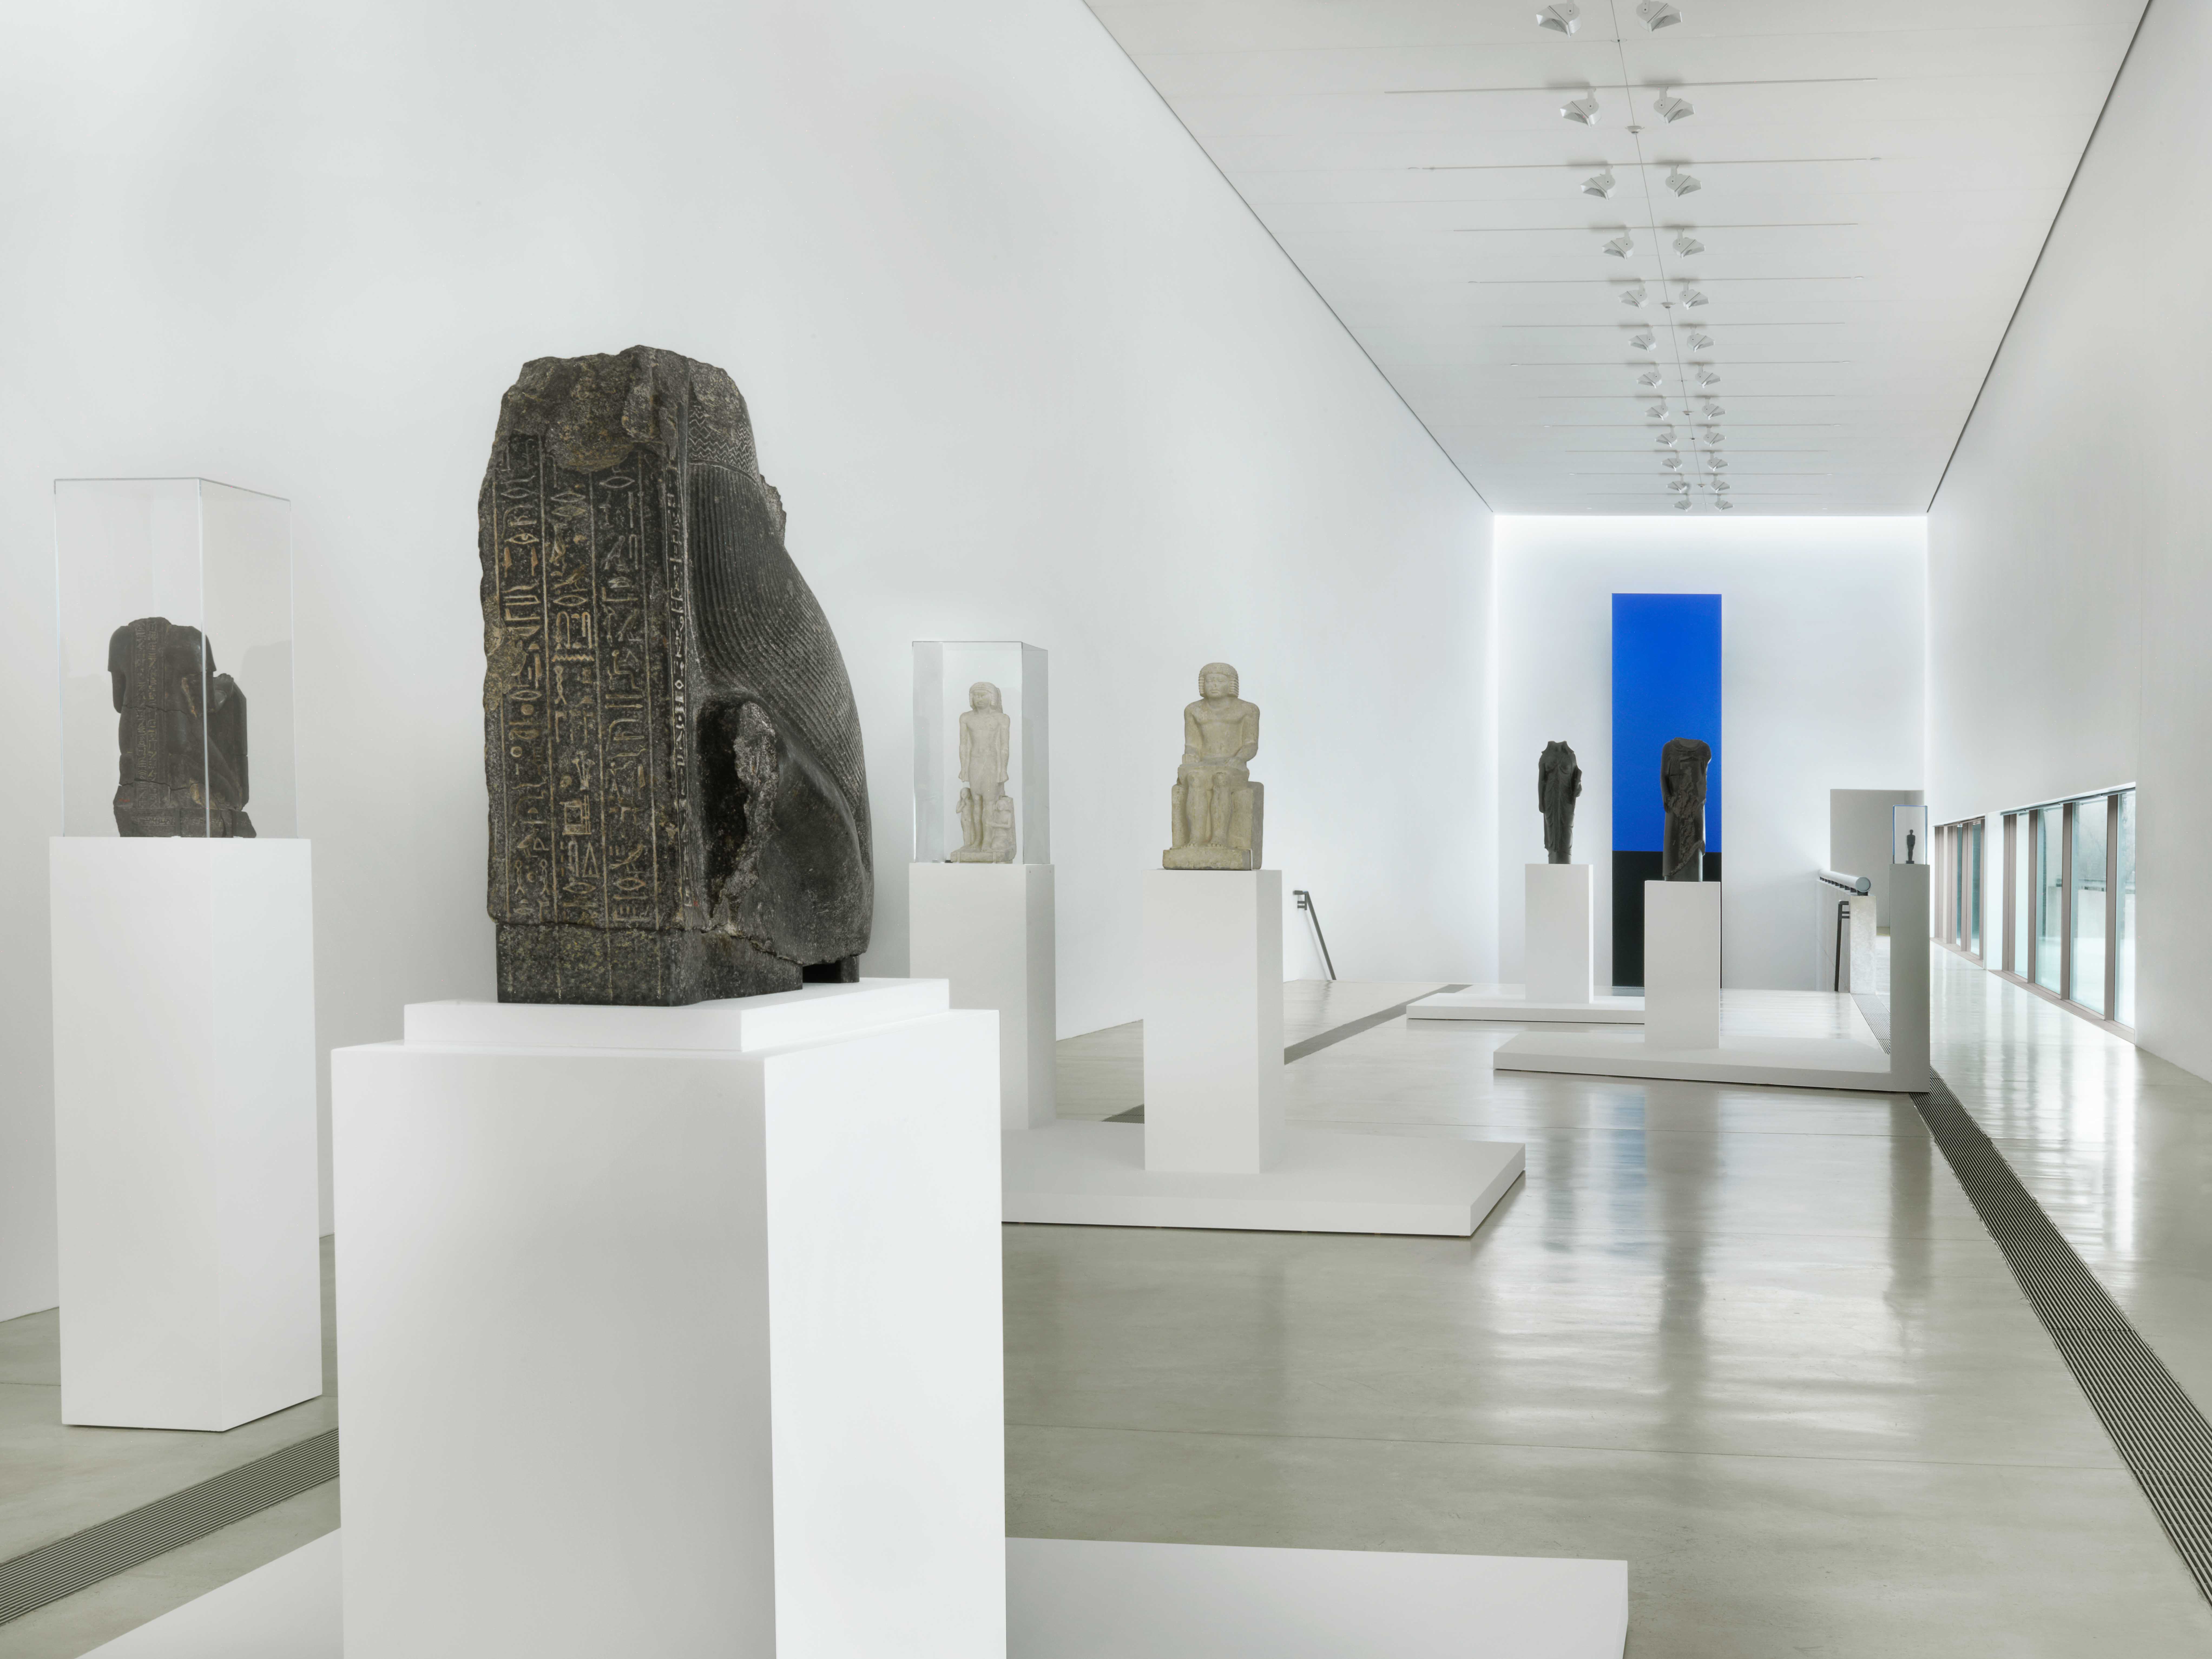 A view of Egyptian sculptures on pedestals and vitrines in the Main Gallery.